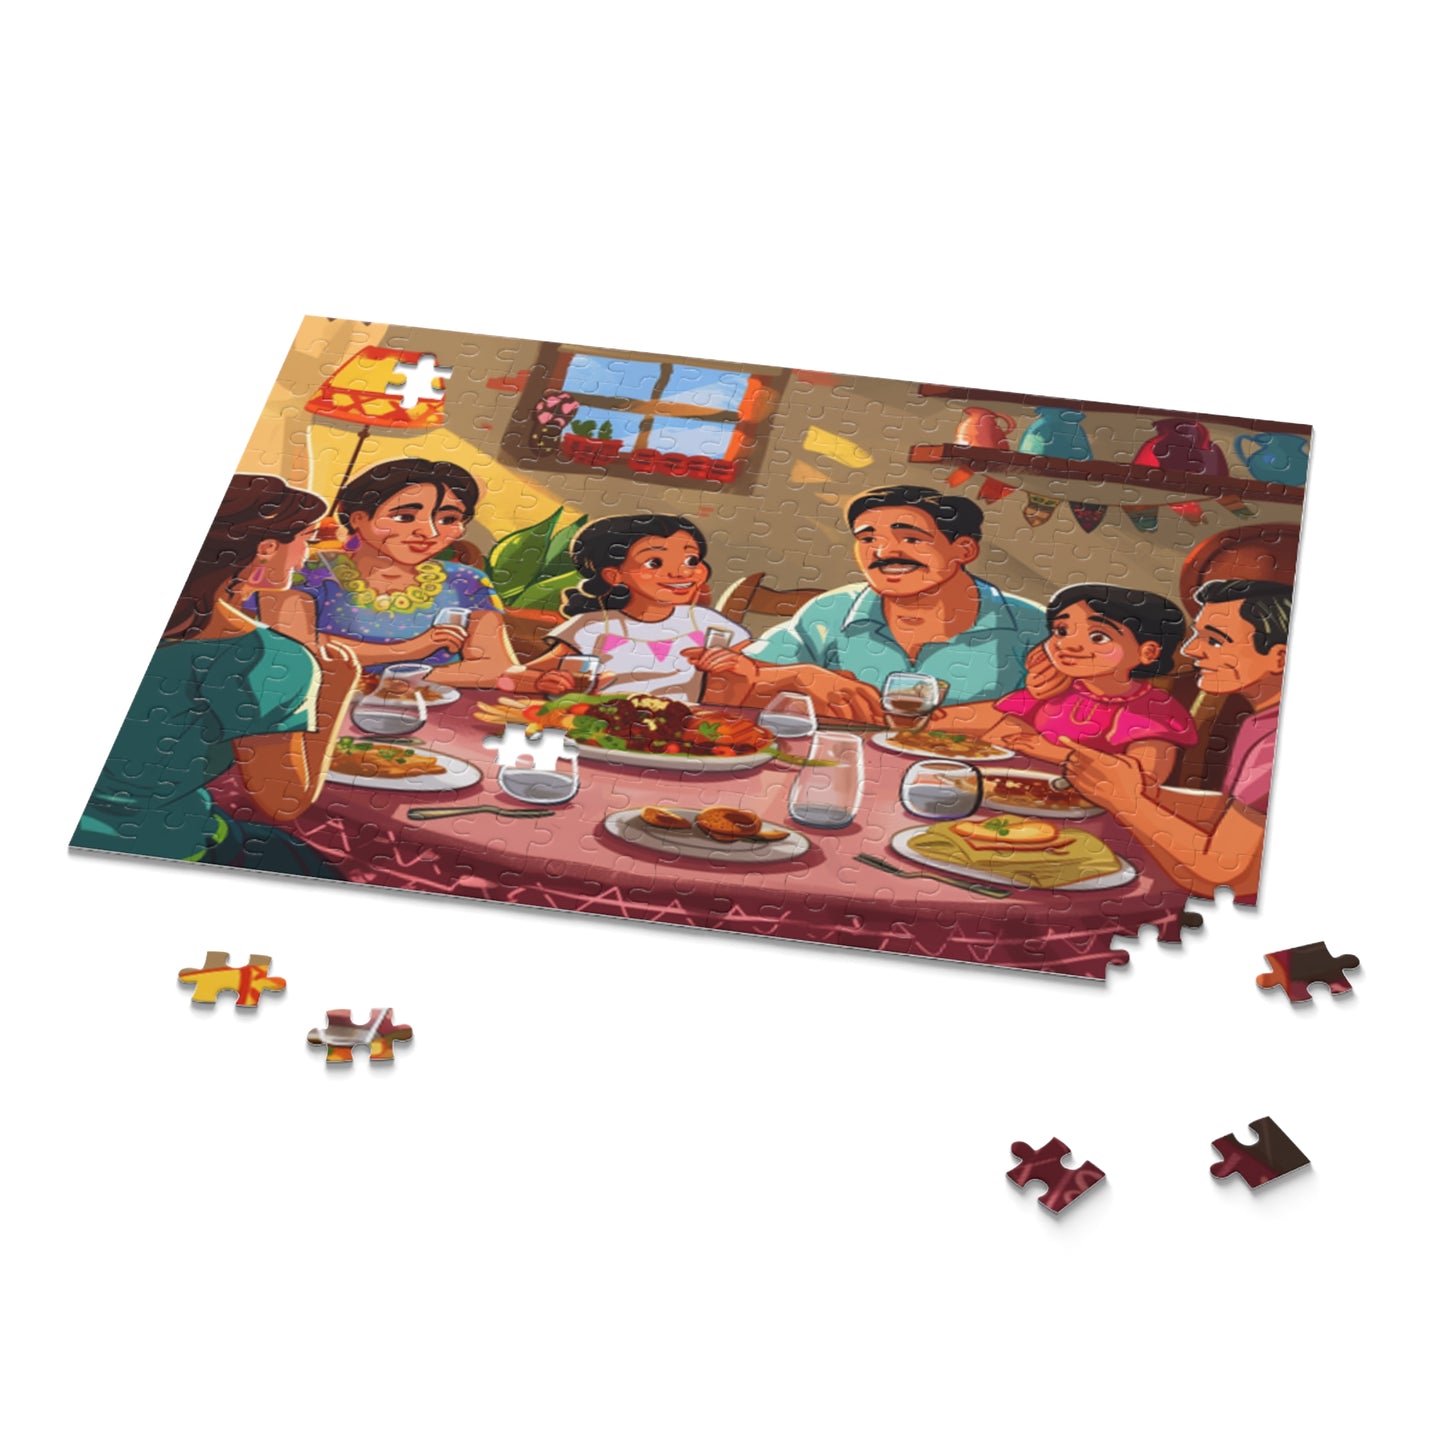 Mexican Art Family Retro Jigsaw Puzzle Adult Birthday Business Jigsaw Puzzle Gift for Him Funny Humorous Indoor Outdoor Game Gift For Her Online-9